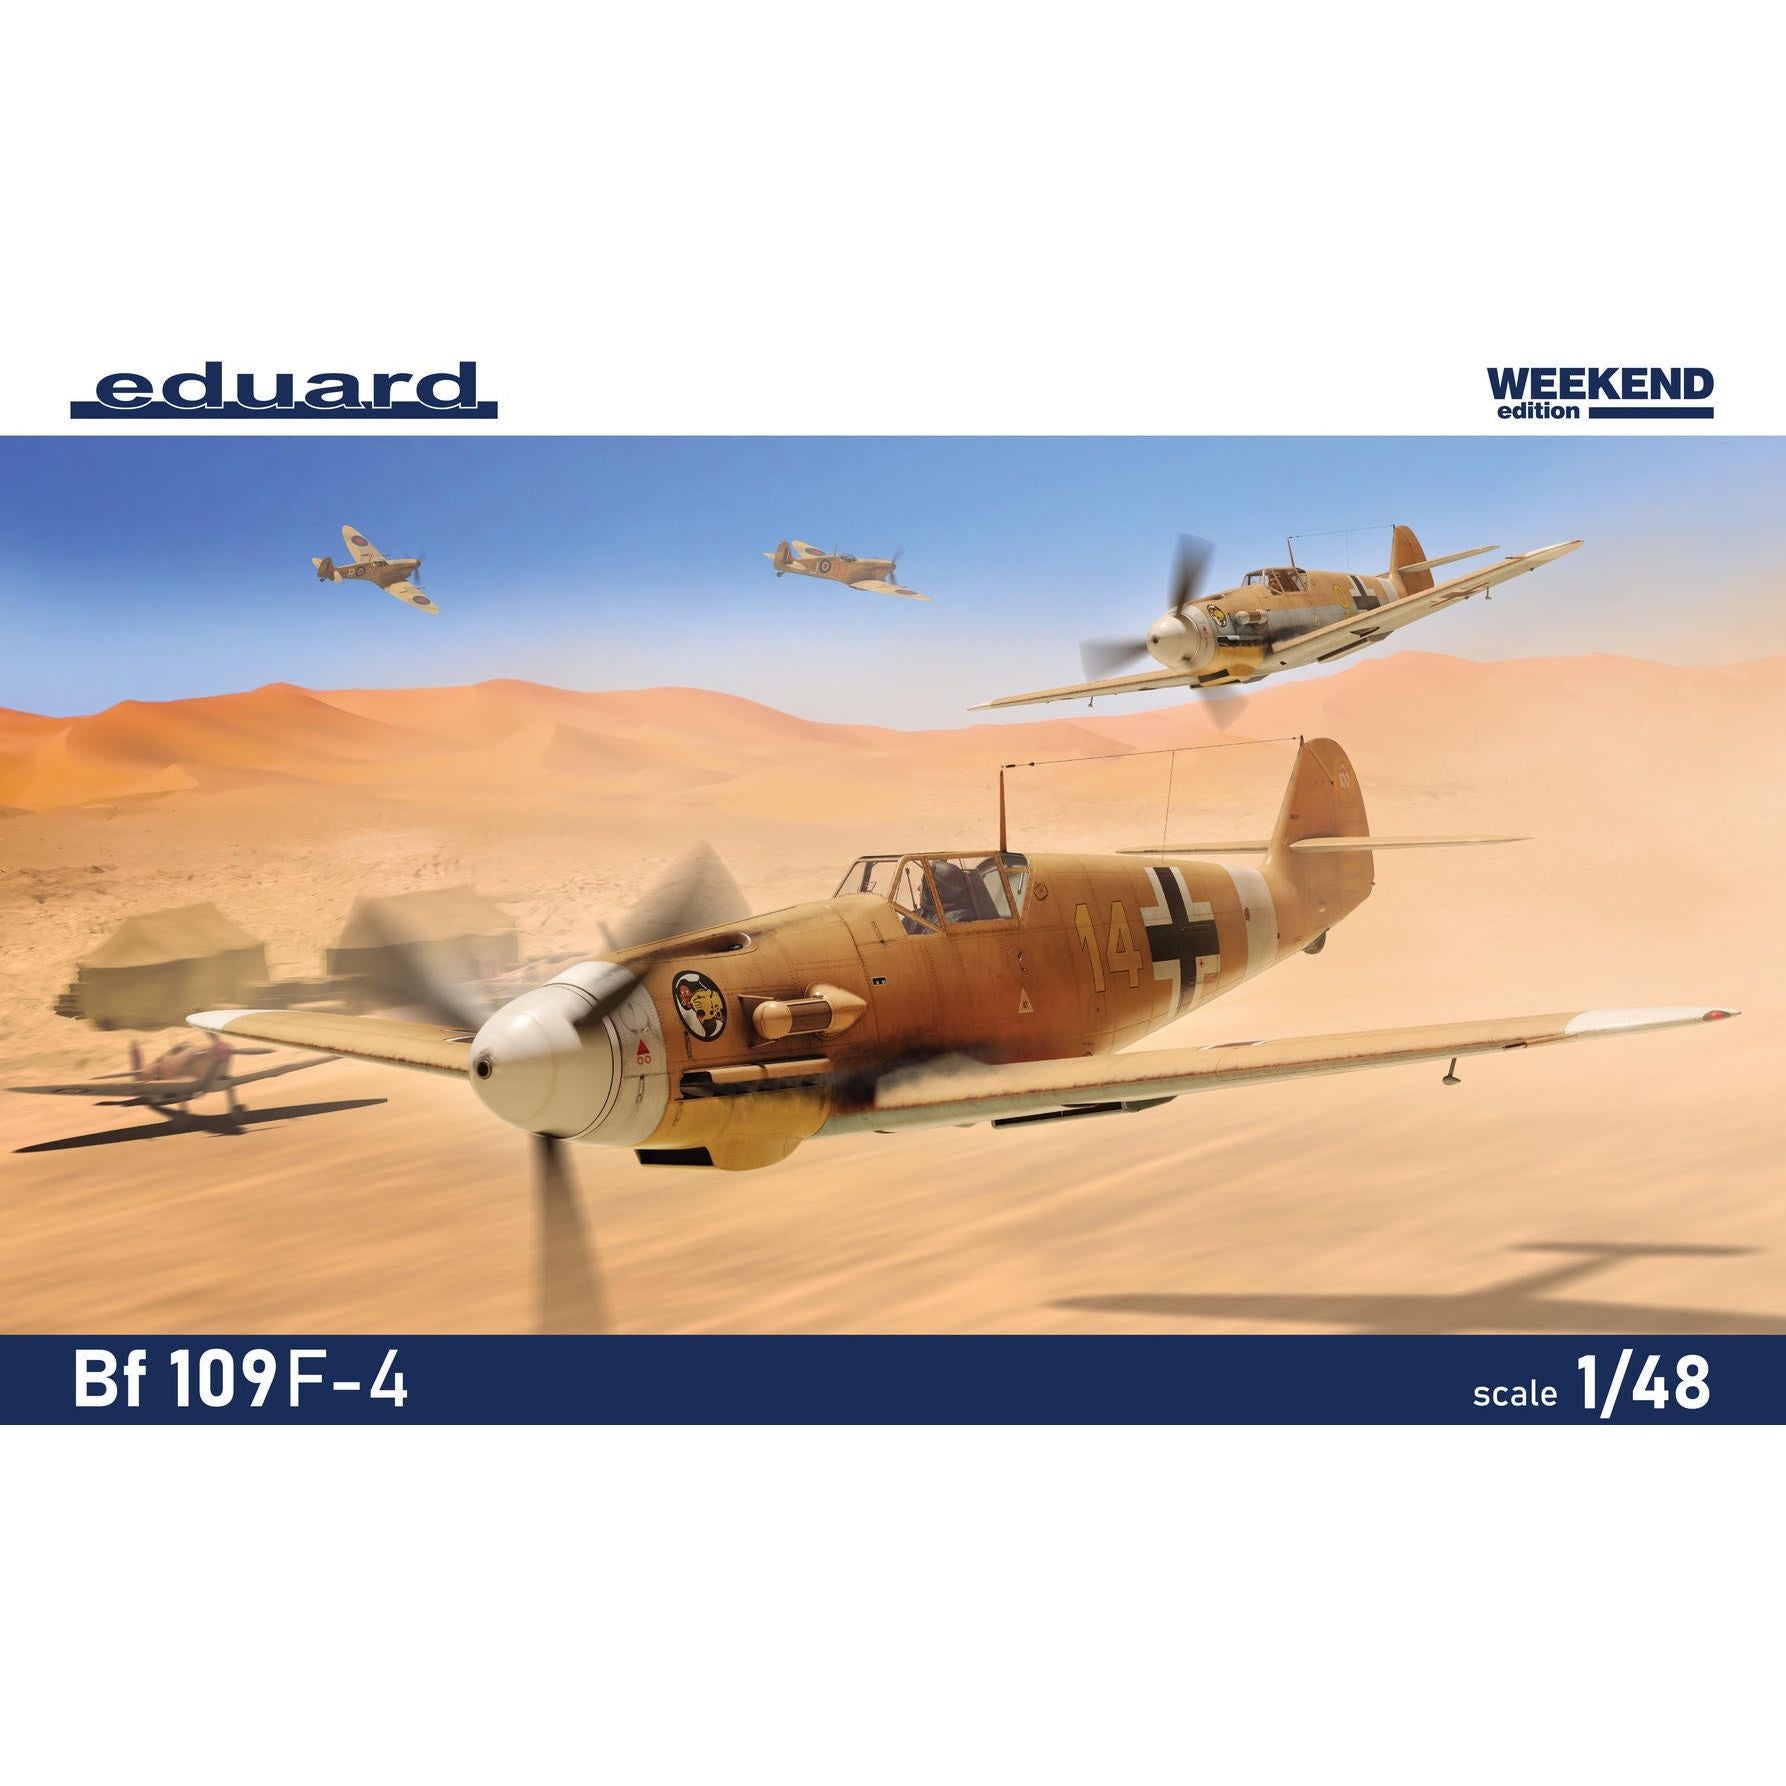 Bf 109F-4 [Weekend Edition] 1/48 #84188 by Eduard